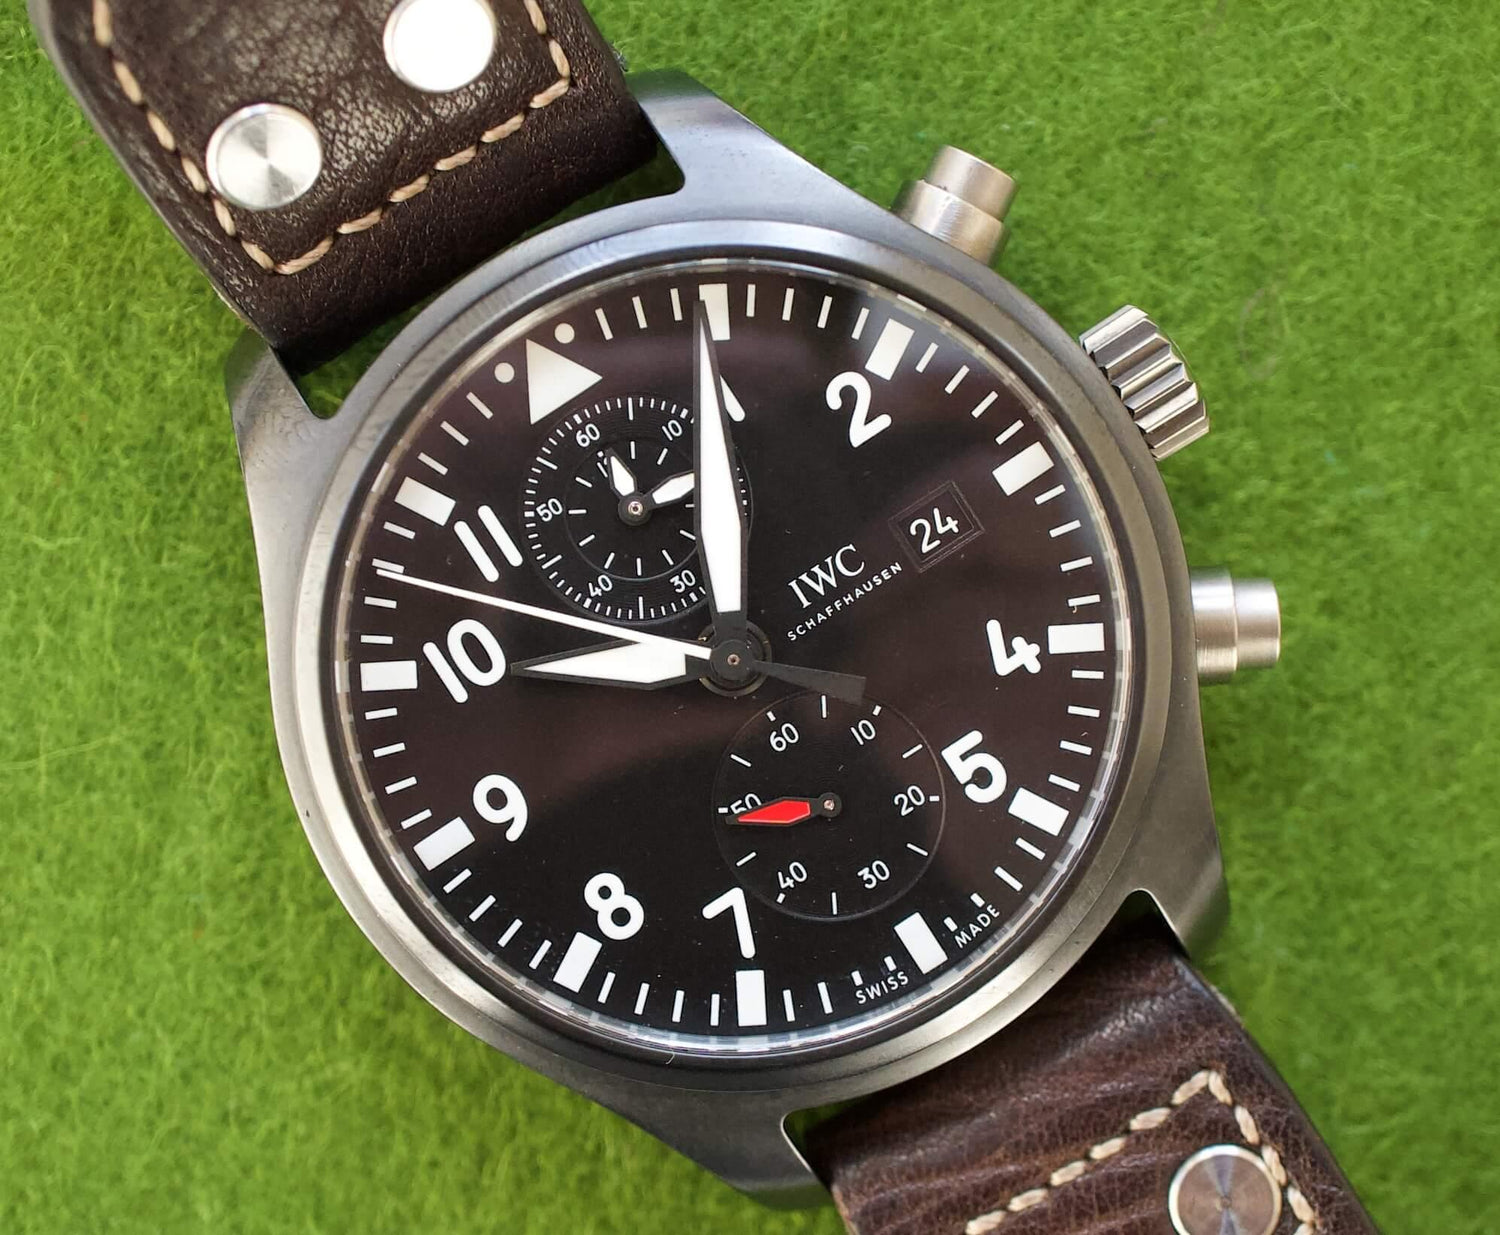 SOLD OUT: IWC Top Gun IW389001 44.5mm Chronograph Black Ceramic Box 2016 - WearingTime Luxury Watches